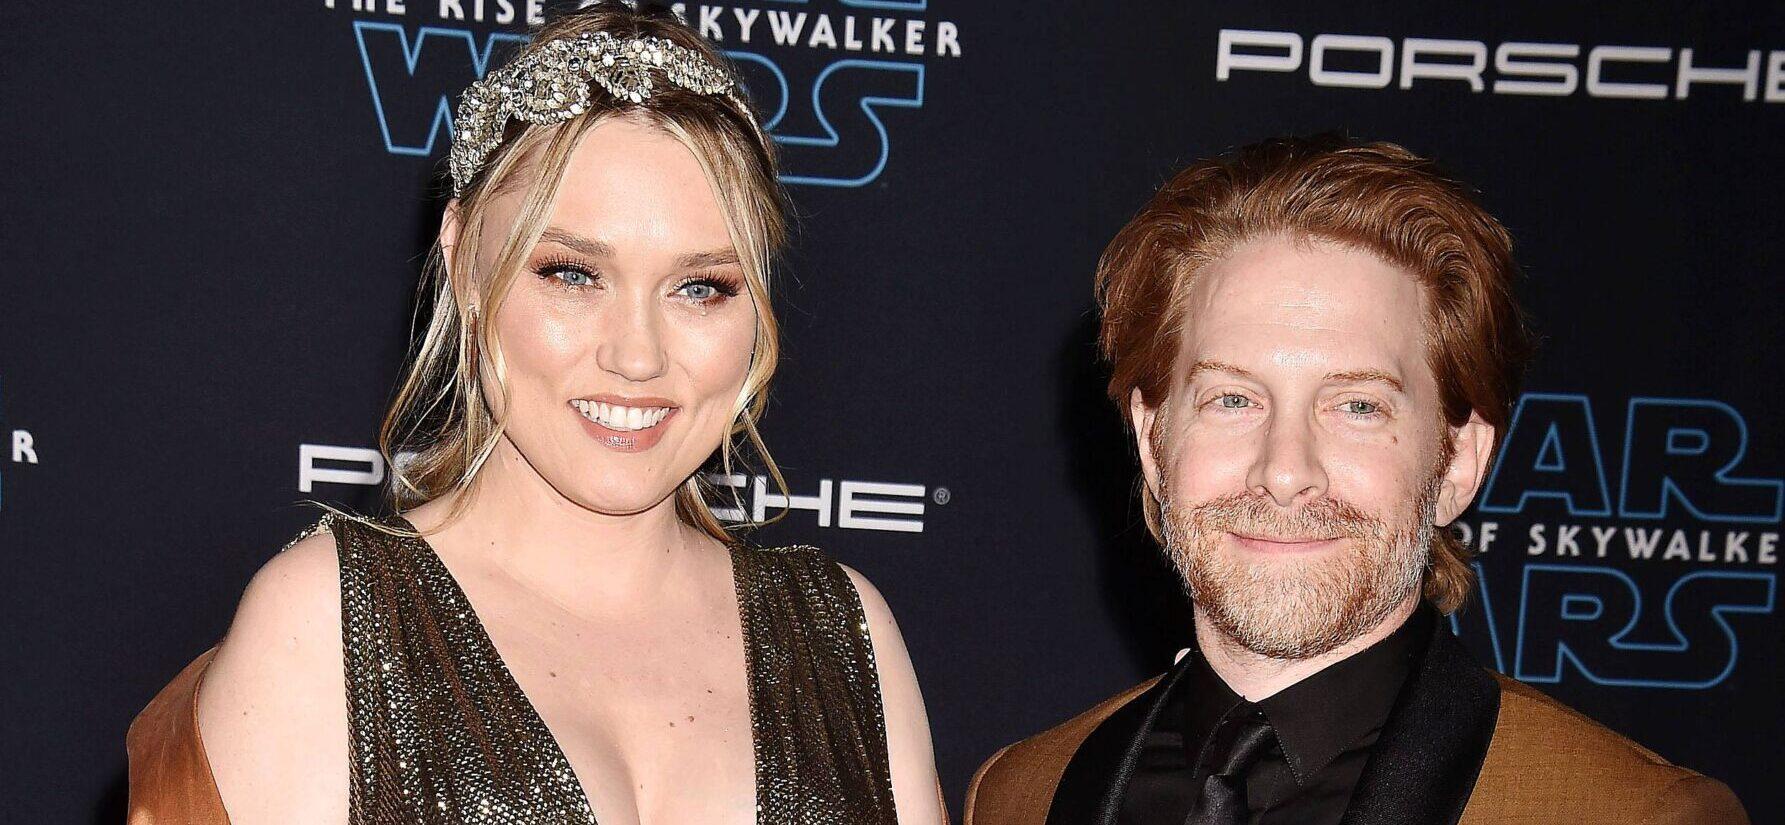 Seth Green and wife Clare Grant at the Premiere Of Disney's "Star Wars: The Rise Of Skywalker" - Arrivals